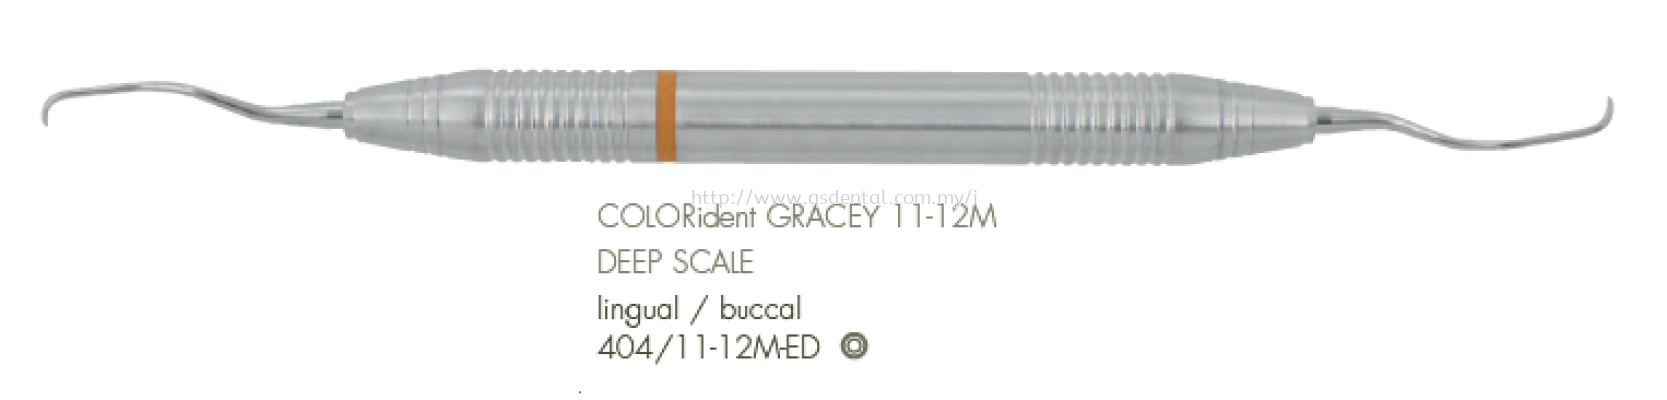 404/11-12M-ED 10mm Handle With COLORident Deep Scale Lingual / Buccal No.11-12M Gracey Curettes